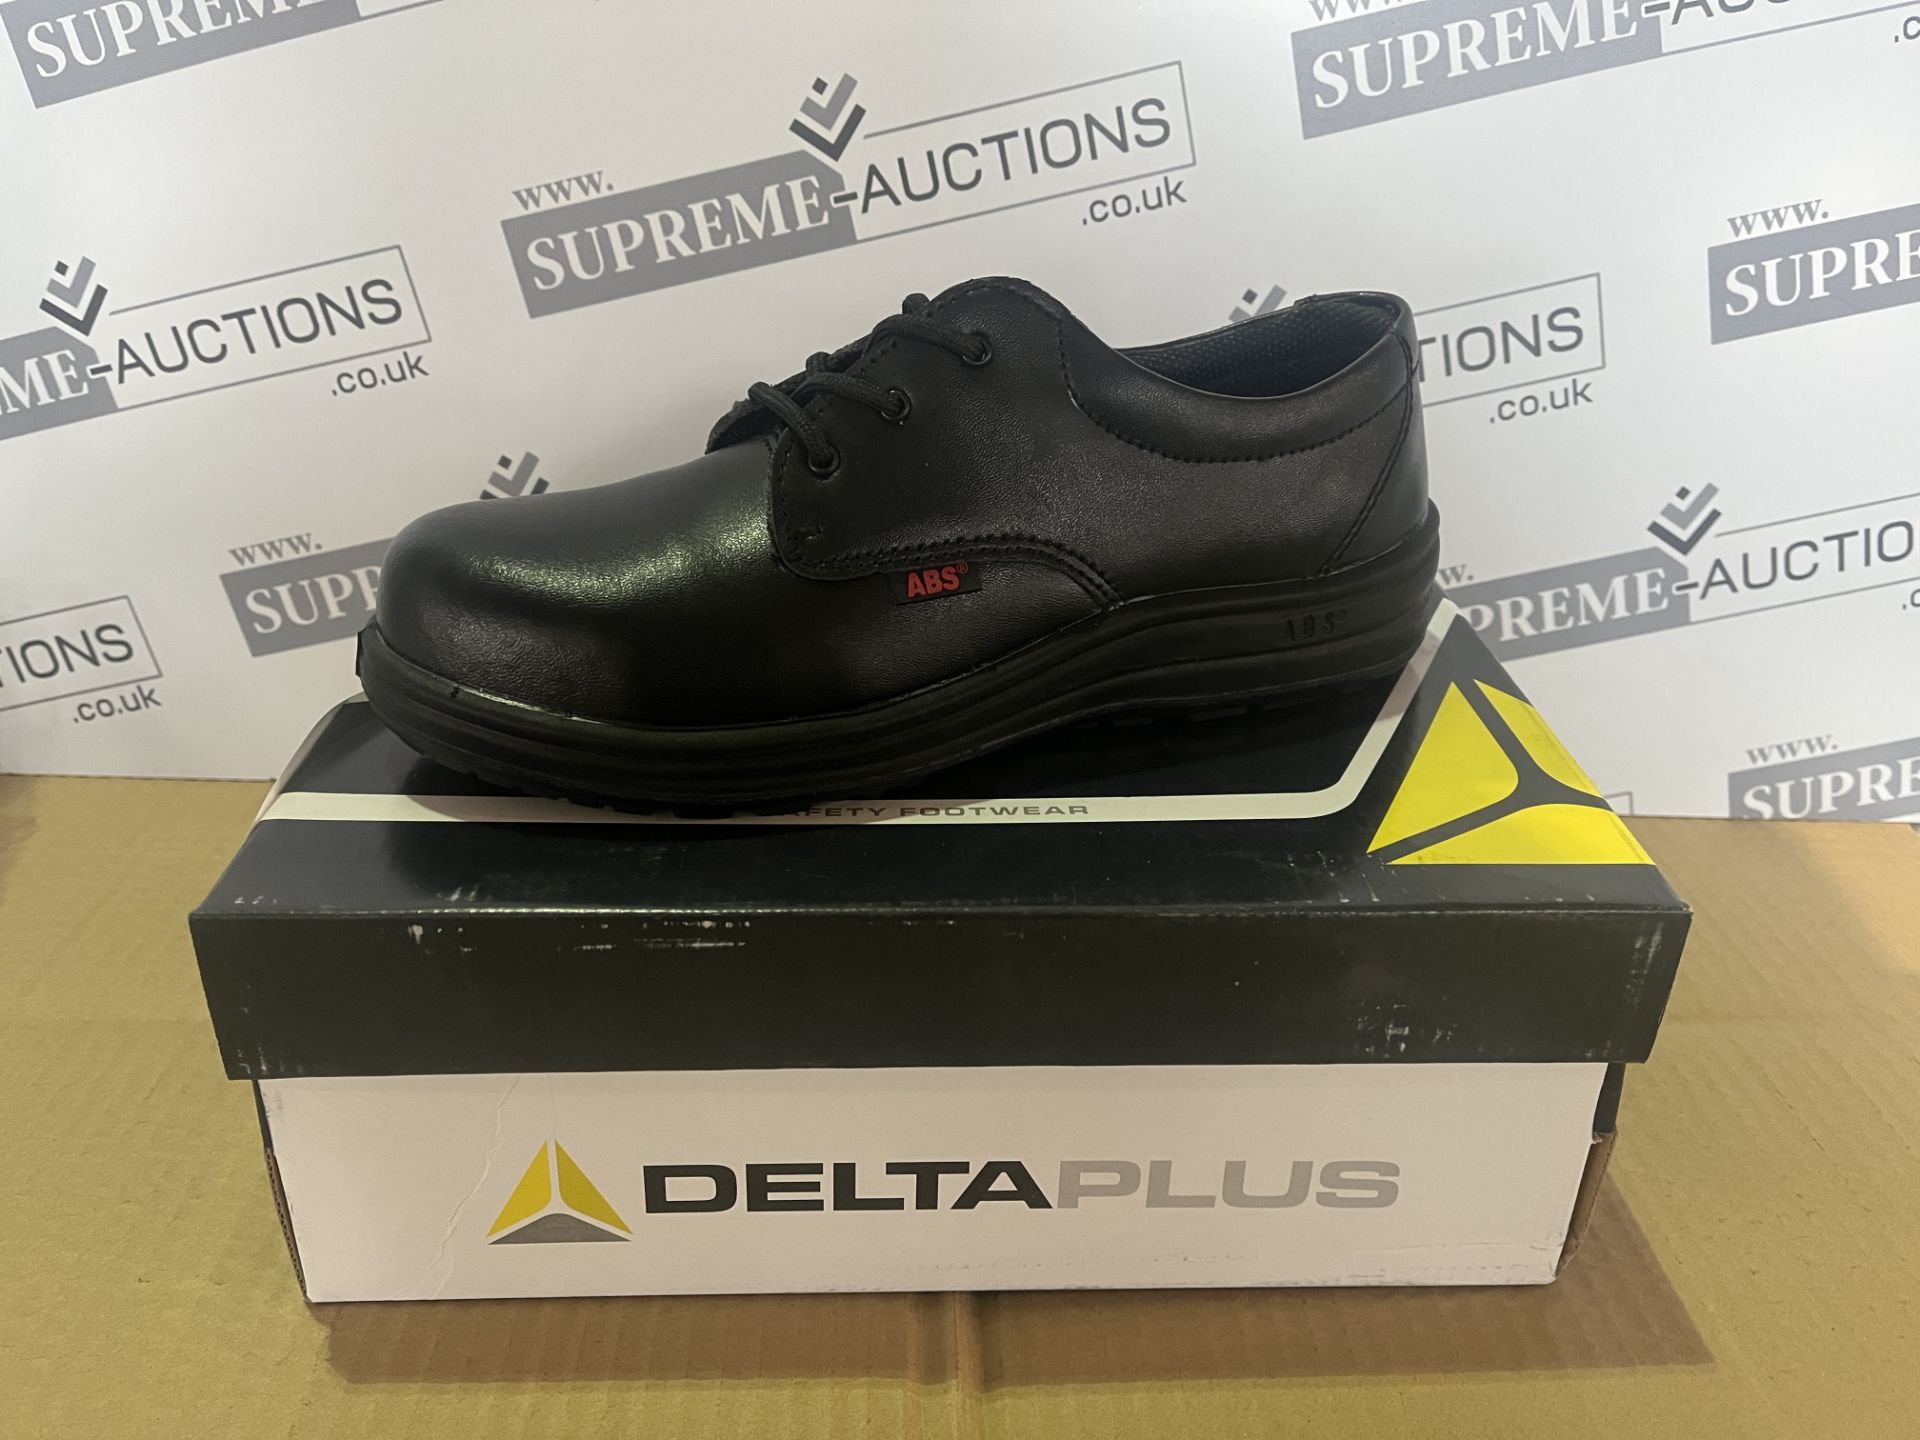 7 X BRAND NEW DELTA PLUS PROFESSIONAL WORK SHOES SIZE 6 R16-10